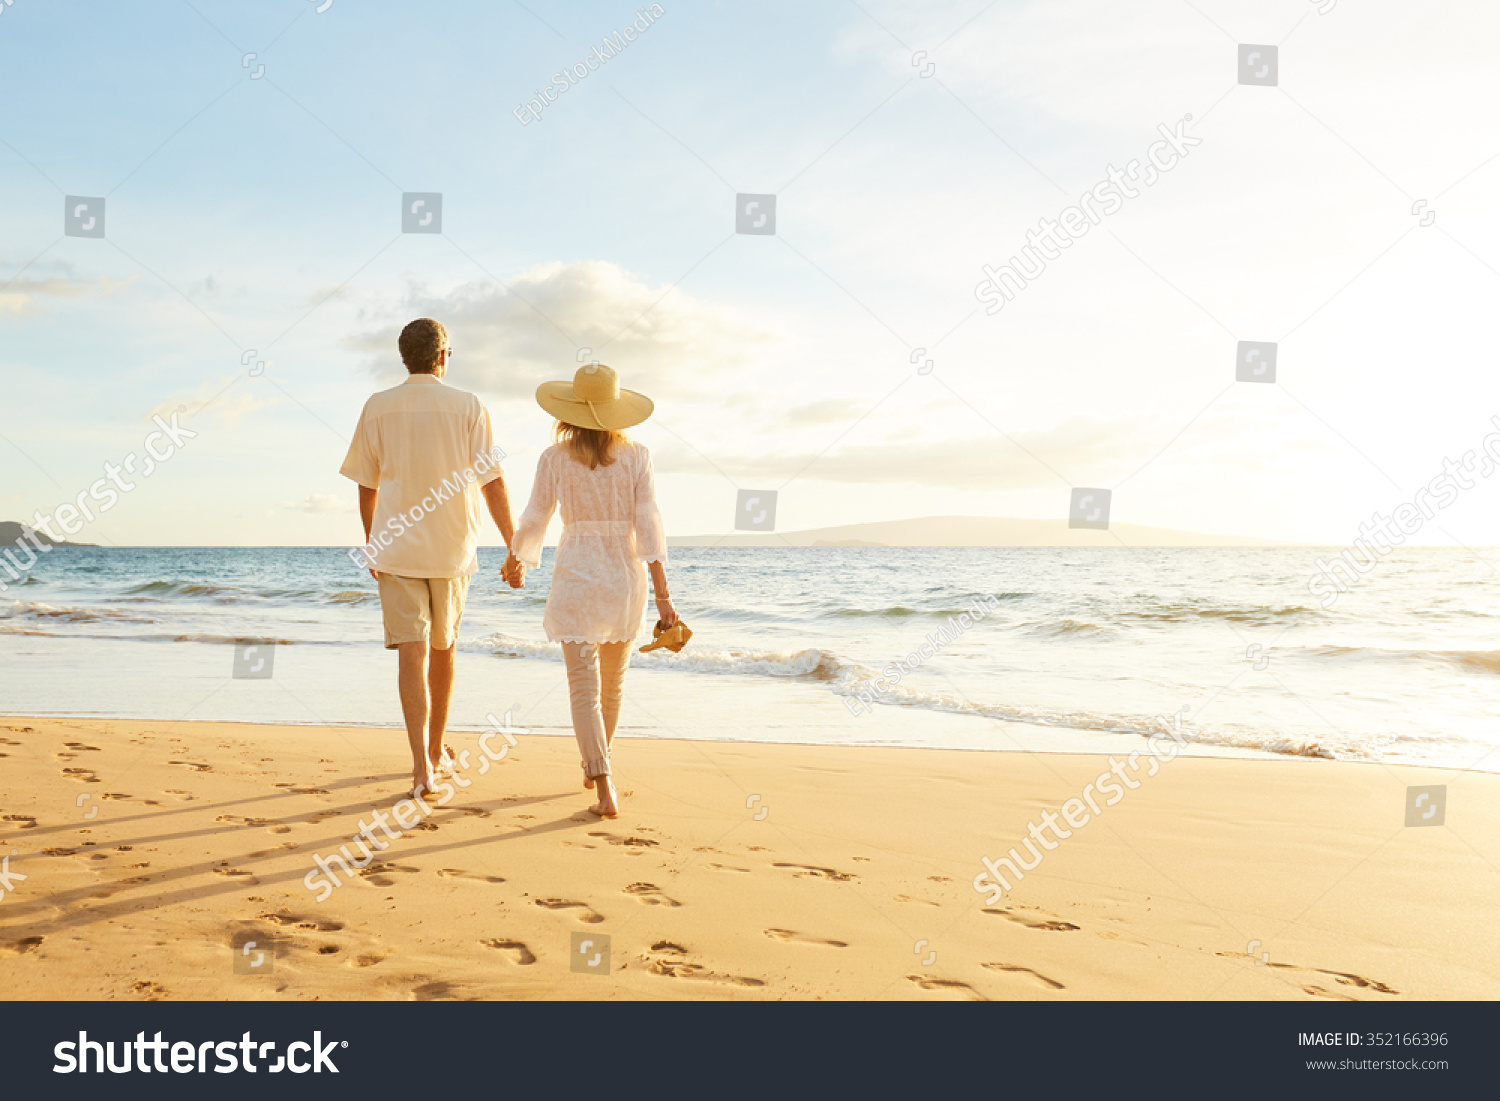 Happy Romantic Middle Aged Couple Enjoying Beautiful Sunset Walk on the Beach. Travel Vacation Retirement Lifestyle Concept #352166396